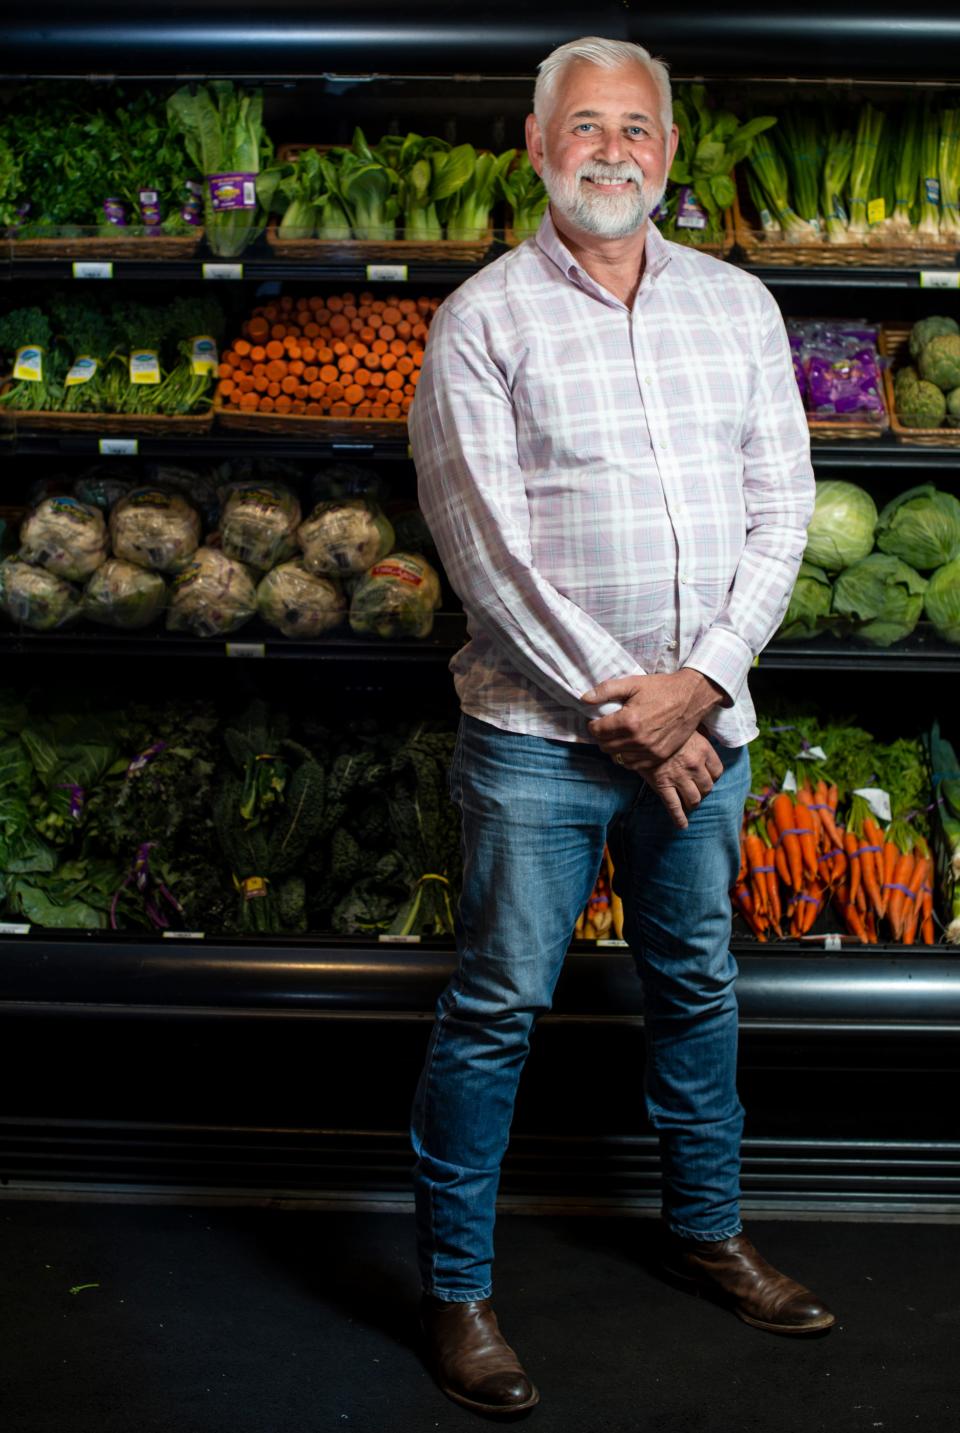 John Dyke, owner of Turnip Truck, poses inside the West Nashville Turnip Truck store on Tuesday, May 11, 2021 in Nashville, Tenn. Dyke is proud of the store's produce section that has a broad selection of locally sourced produce. 